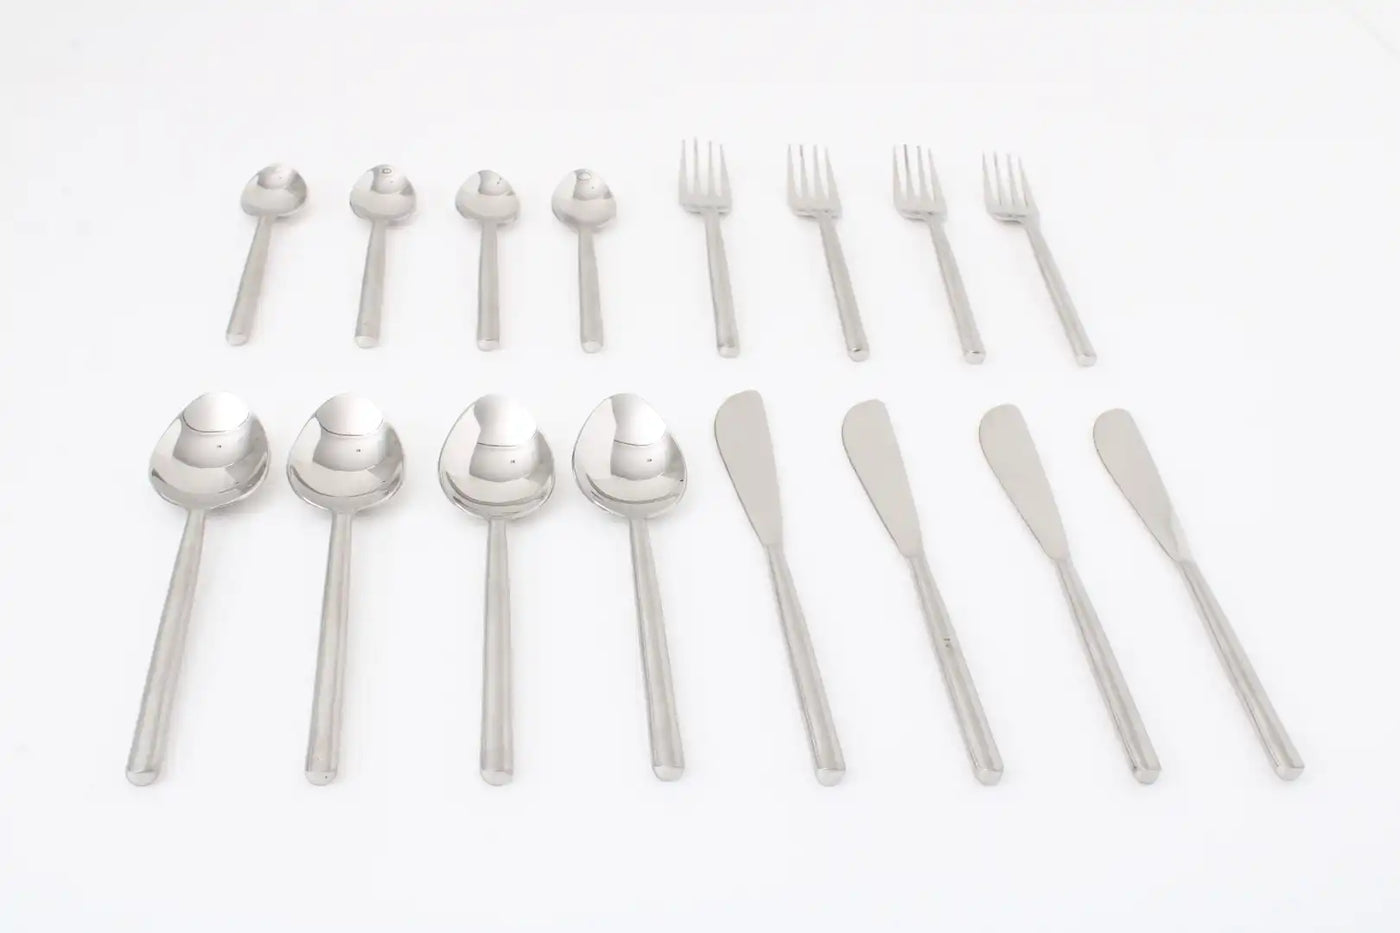 Radiant Reflections Cutlery Set of 16 80-005-23 (16)